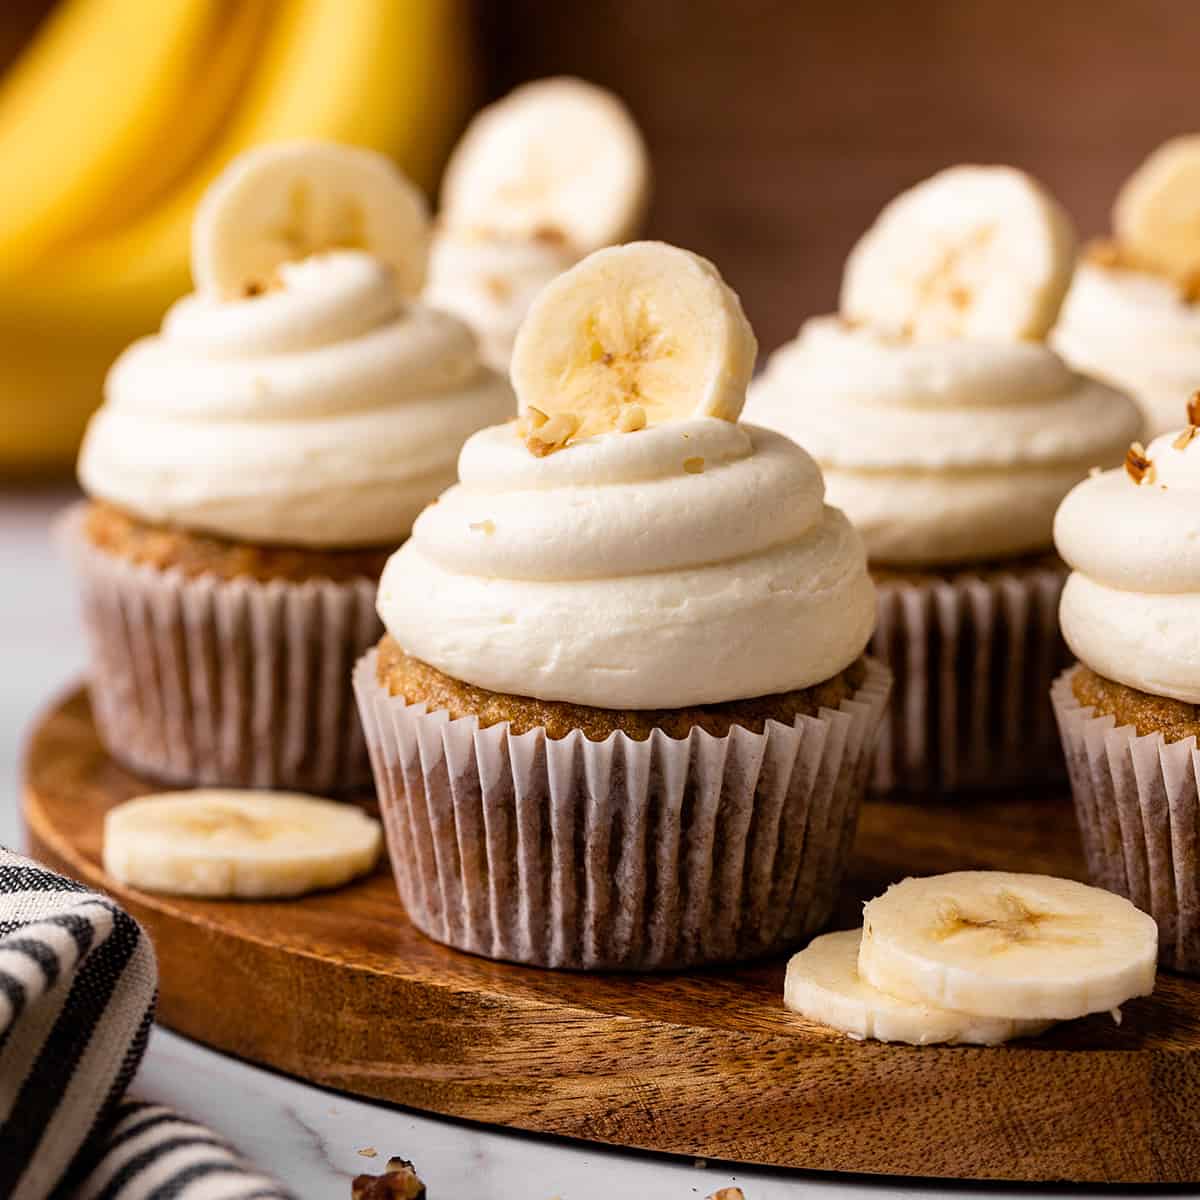 6 Banana Cupcakes, frosted and topped with fresh bananas